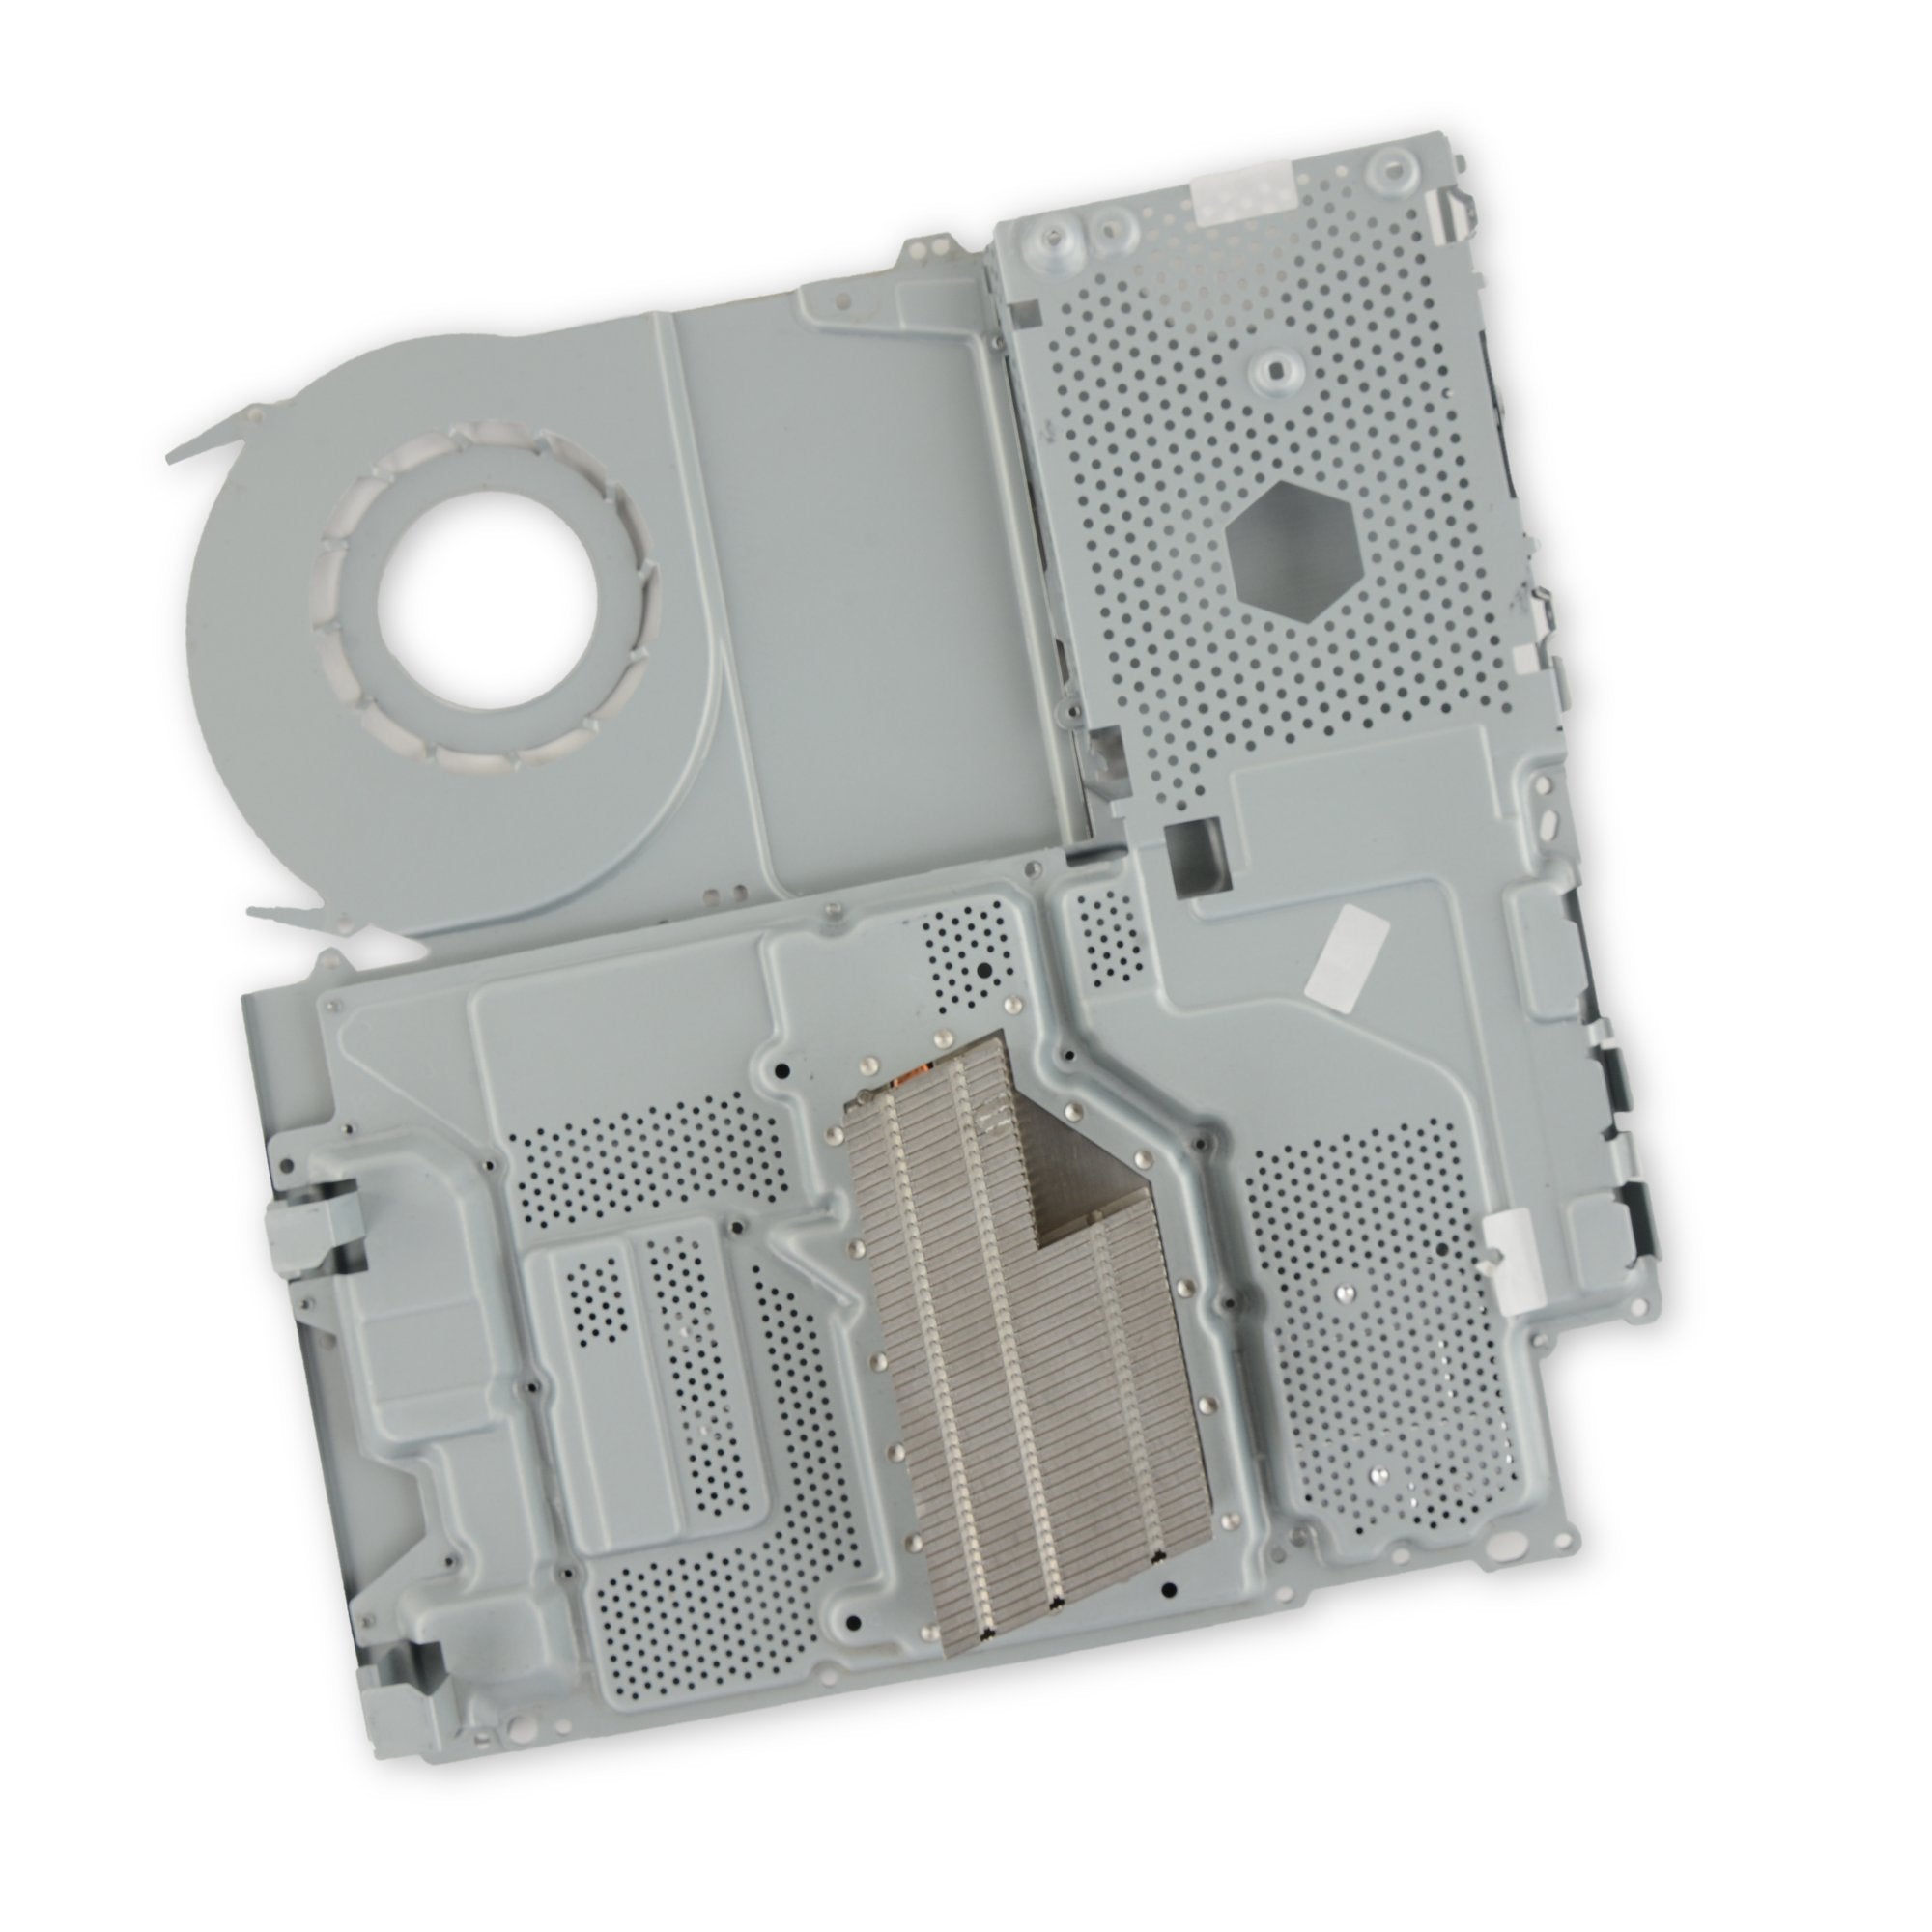 PlayStation Slim Sink and Chassis Plates